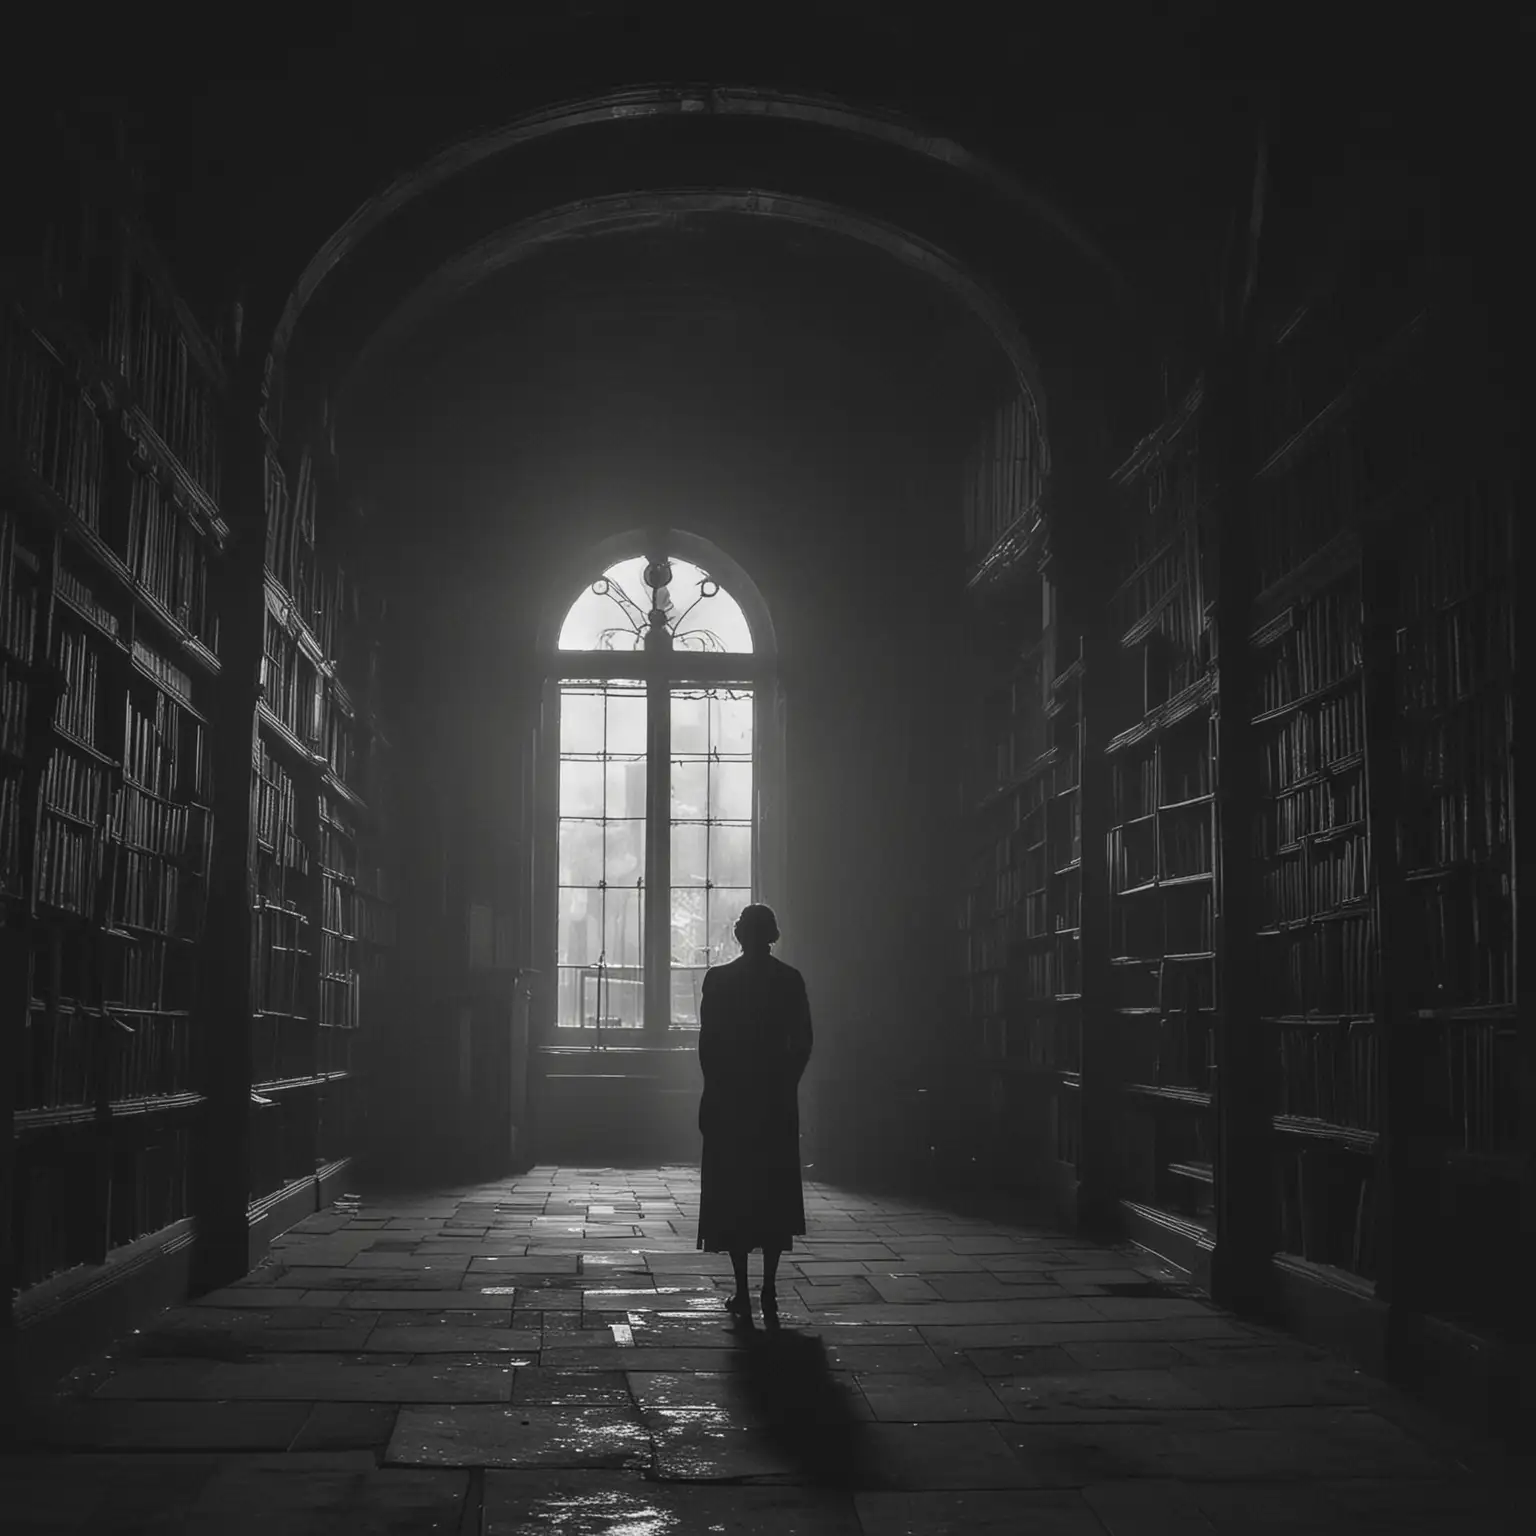 old library, dark, lone figure standing outside